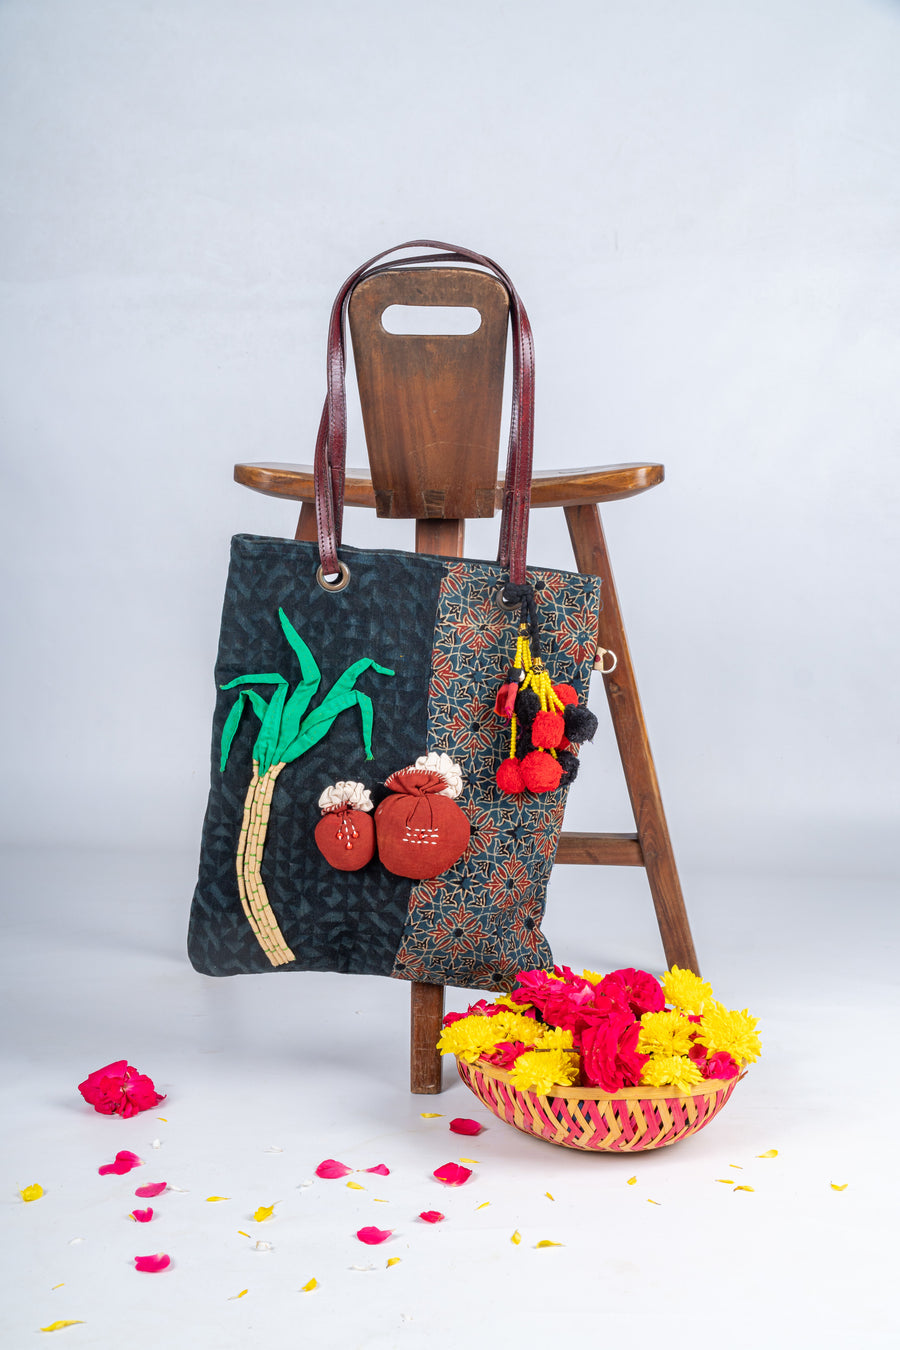 These Spring 2019 Bag Trends Are So Chic, You'll Want to Shop Them All |  Crochet purse patterns, Knitted bags, Crochet handbags